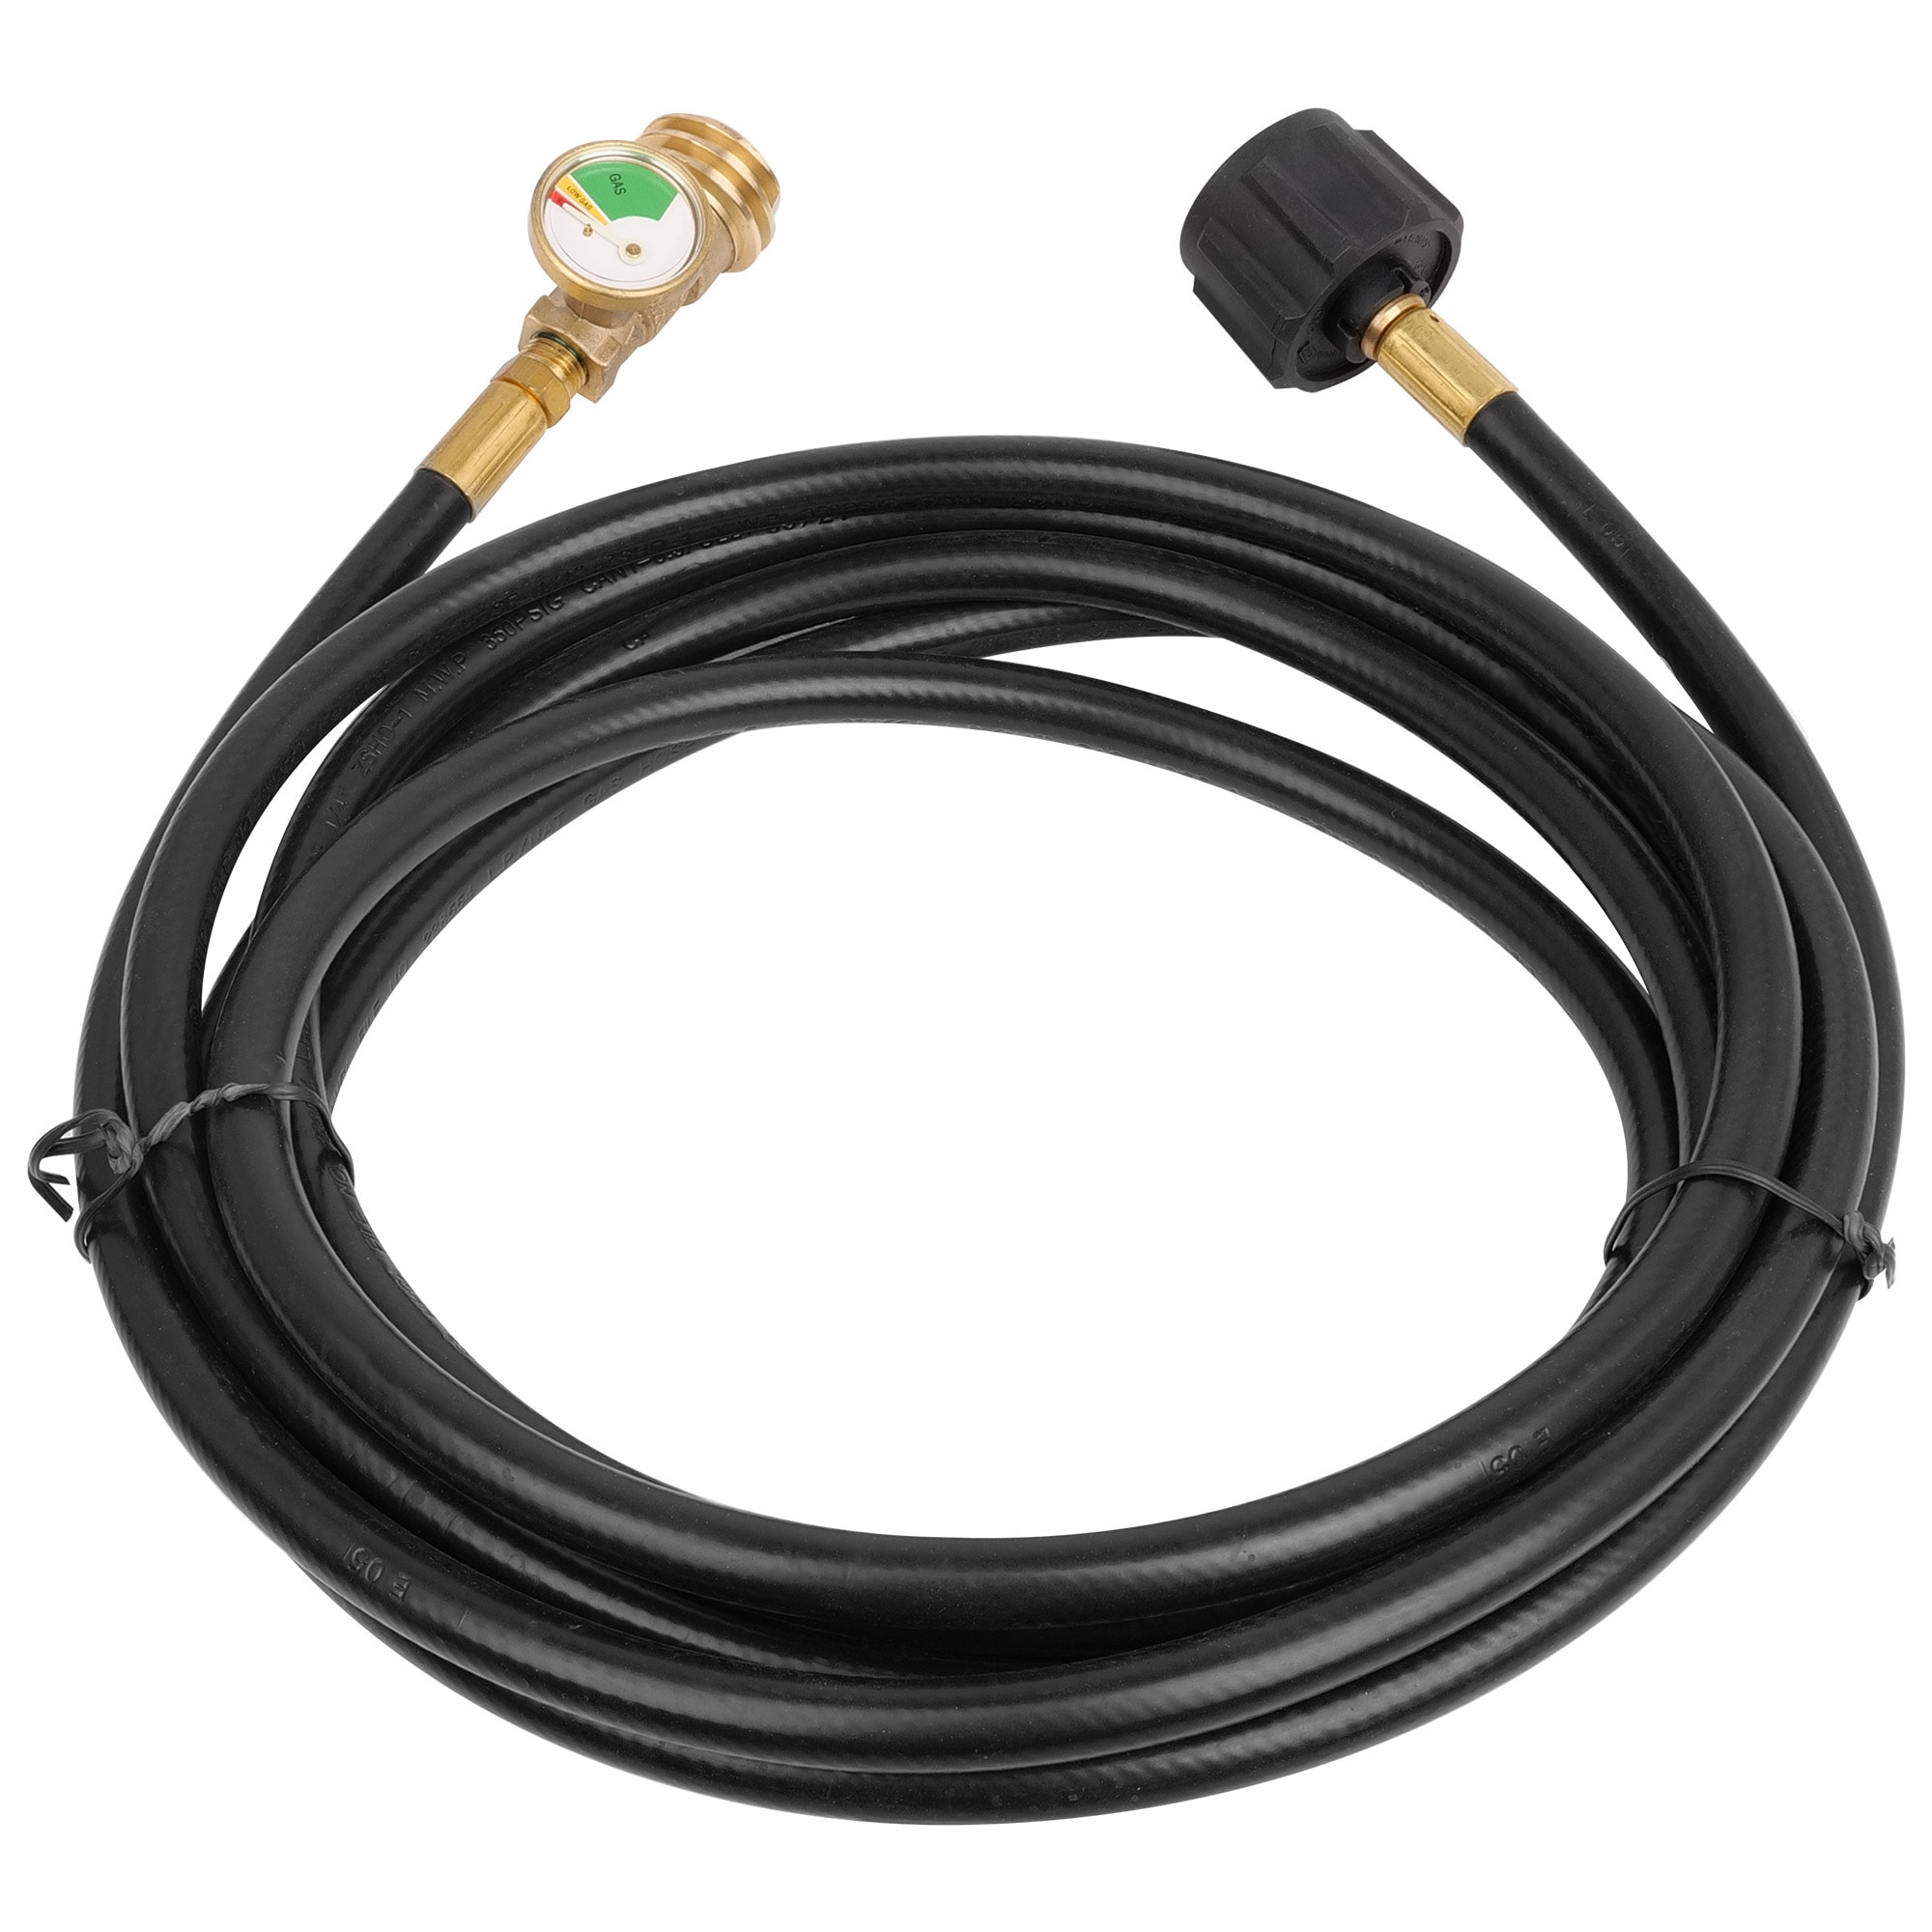 Extension hose adapter kit